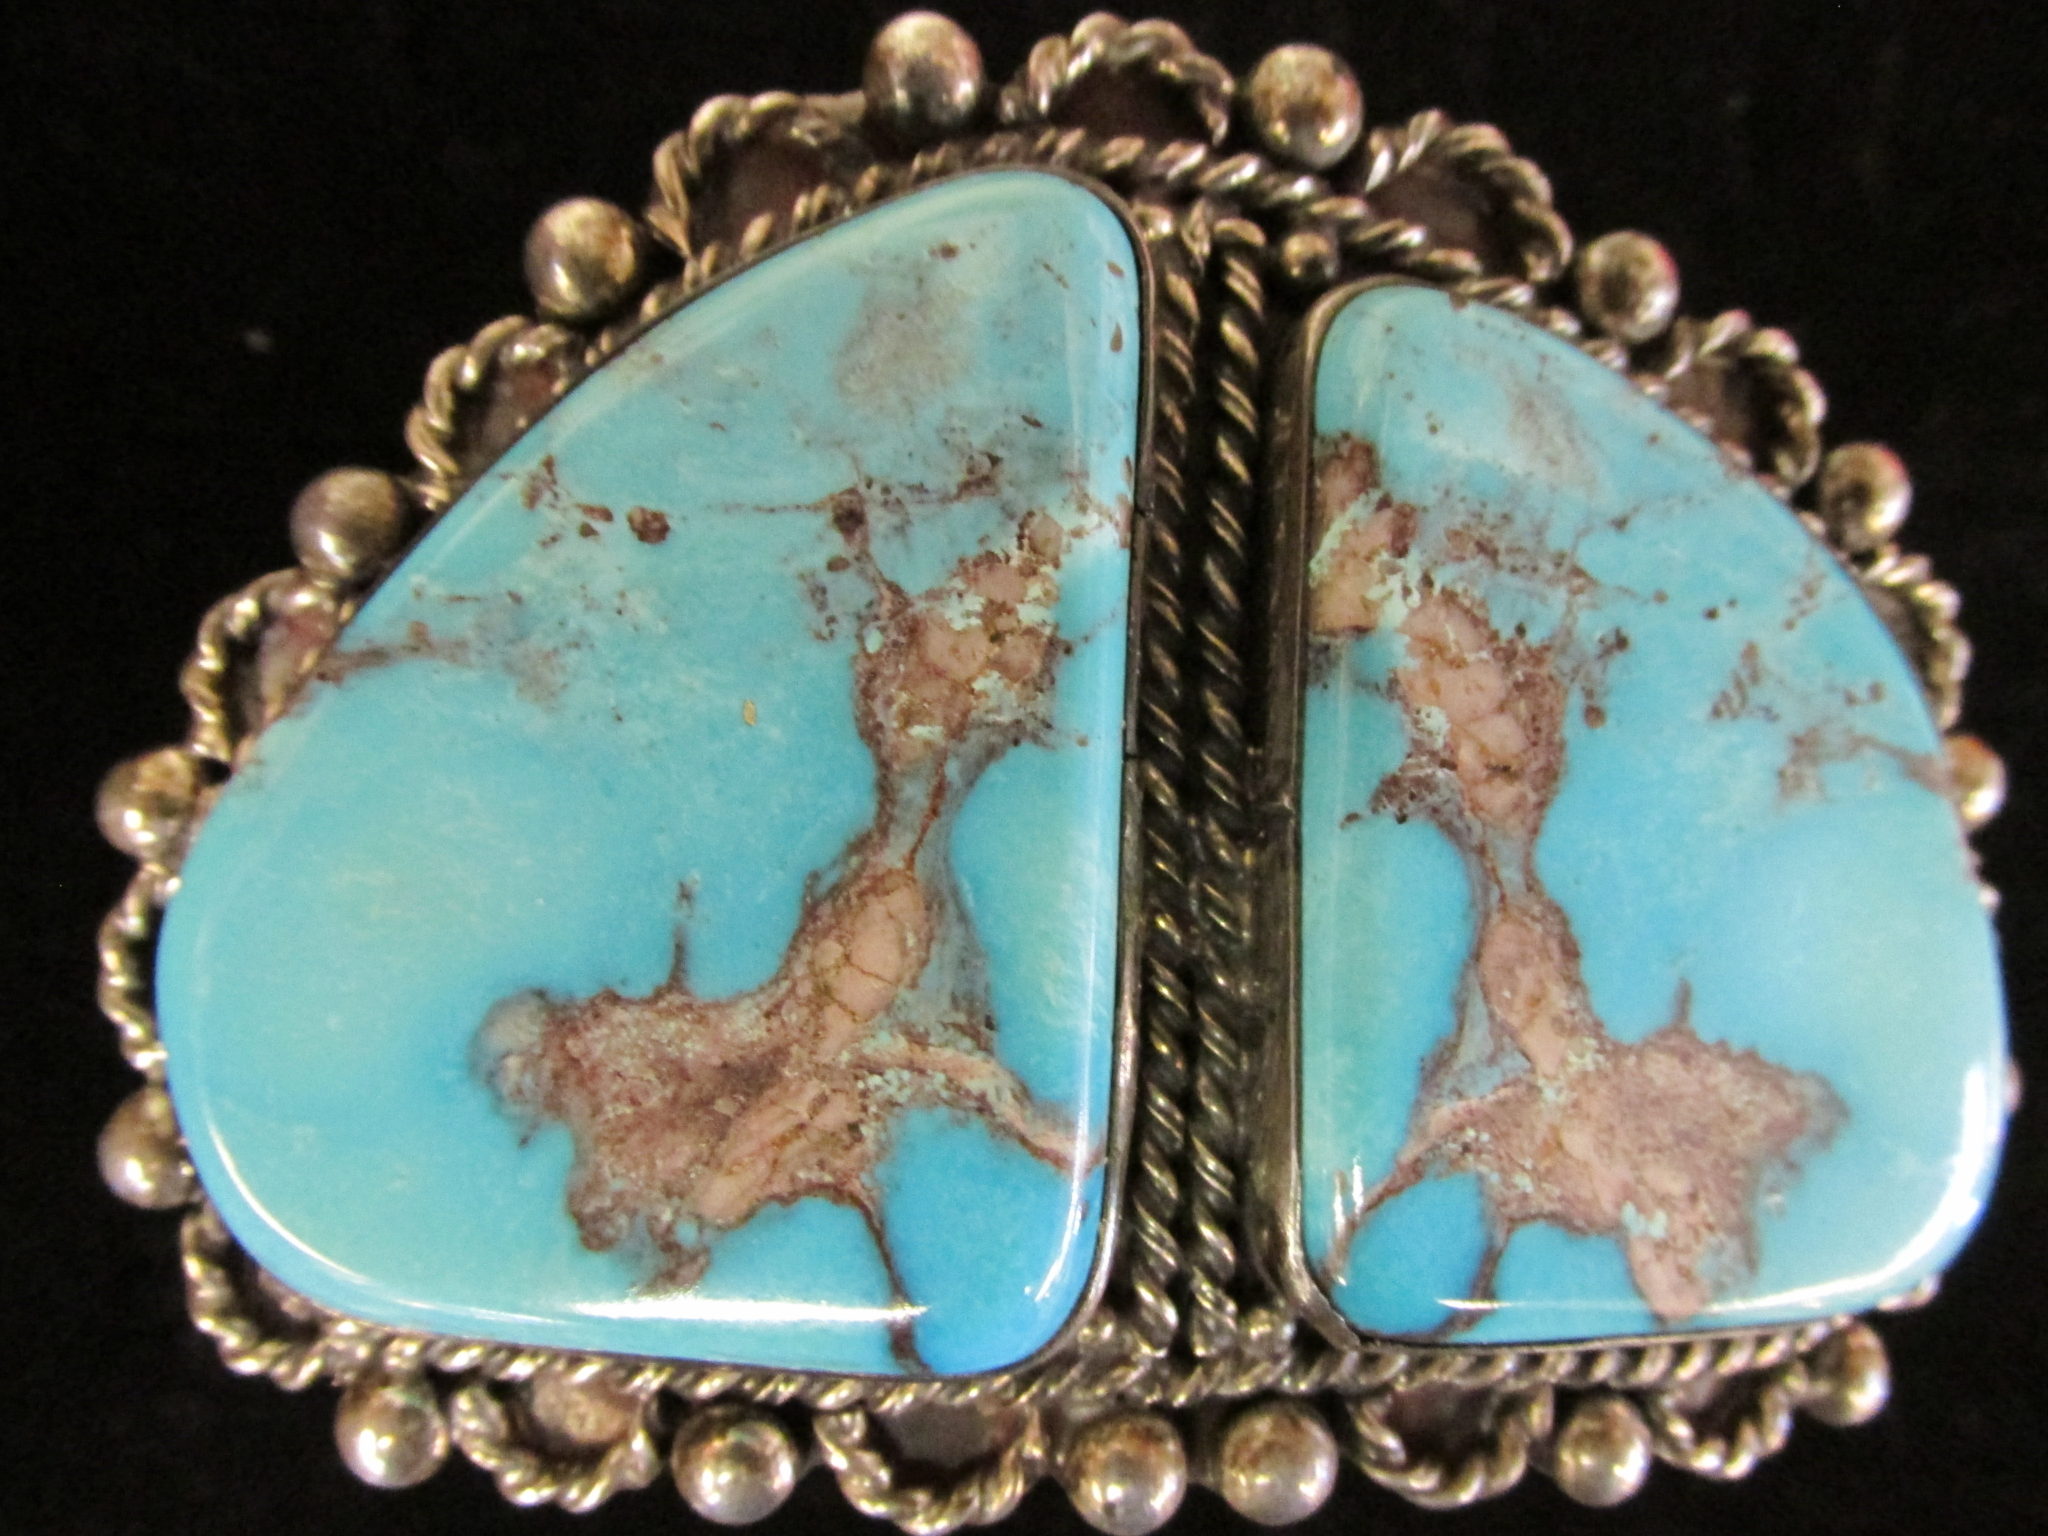 Book-matched Bisbee cabochons with classic colored matrix